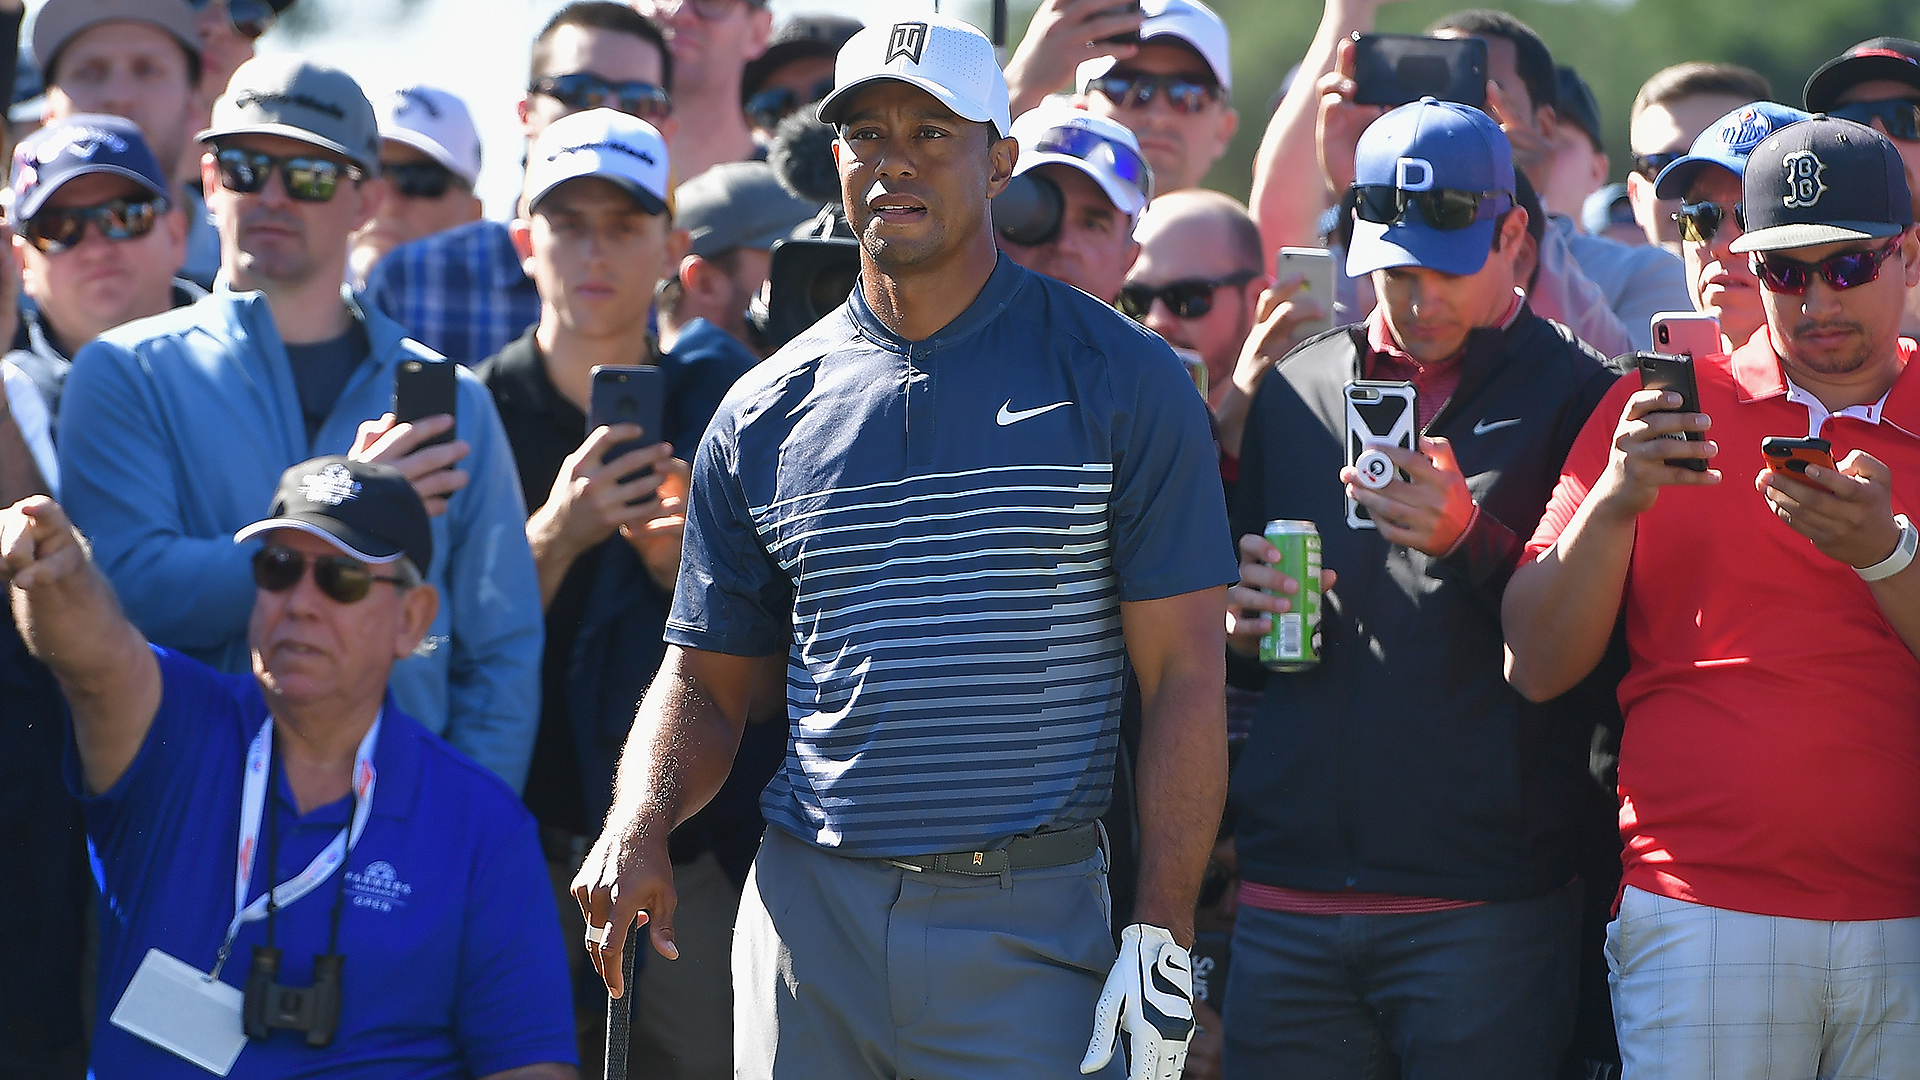 Tiger Woods Finally Gets A Win Without A Victory